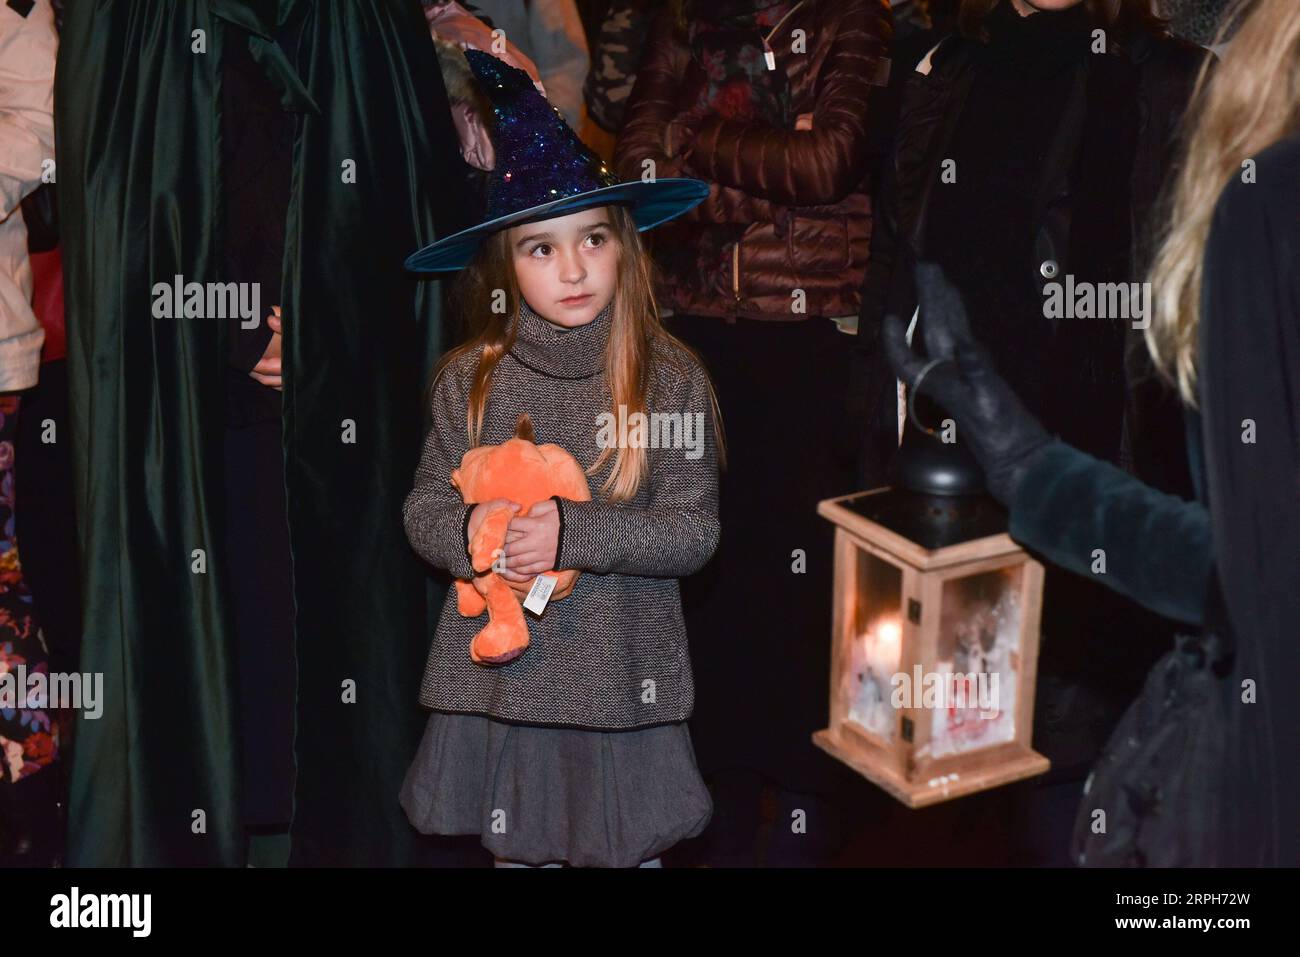 191031 -- ZAGREB, Oct. 31, 2019 -- A costumed girl takes part in a night tour called Uppertown Witches in Zagreb, Croatia, Oct. 31, 2019. The guided tour involves interactive entertainment and introduction to Middle Ages history. /Pixsell via Xinhua CROATIA-ZAGREB-WITCHES TOUR DavorinxVisnjic PUBLICATIONxNOTxINxCHN Stock Photo